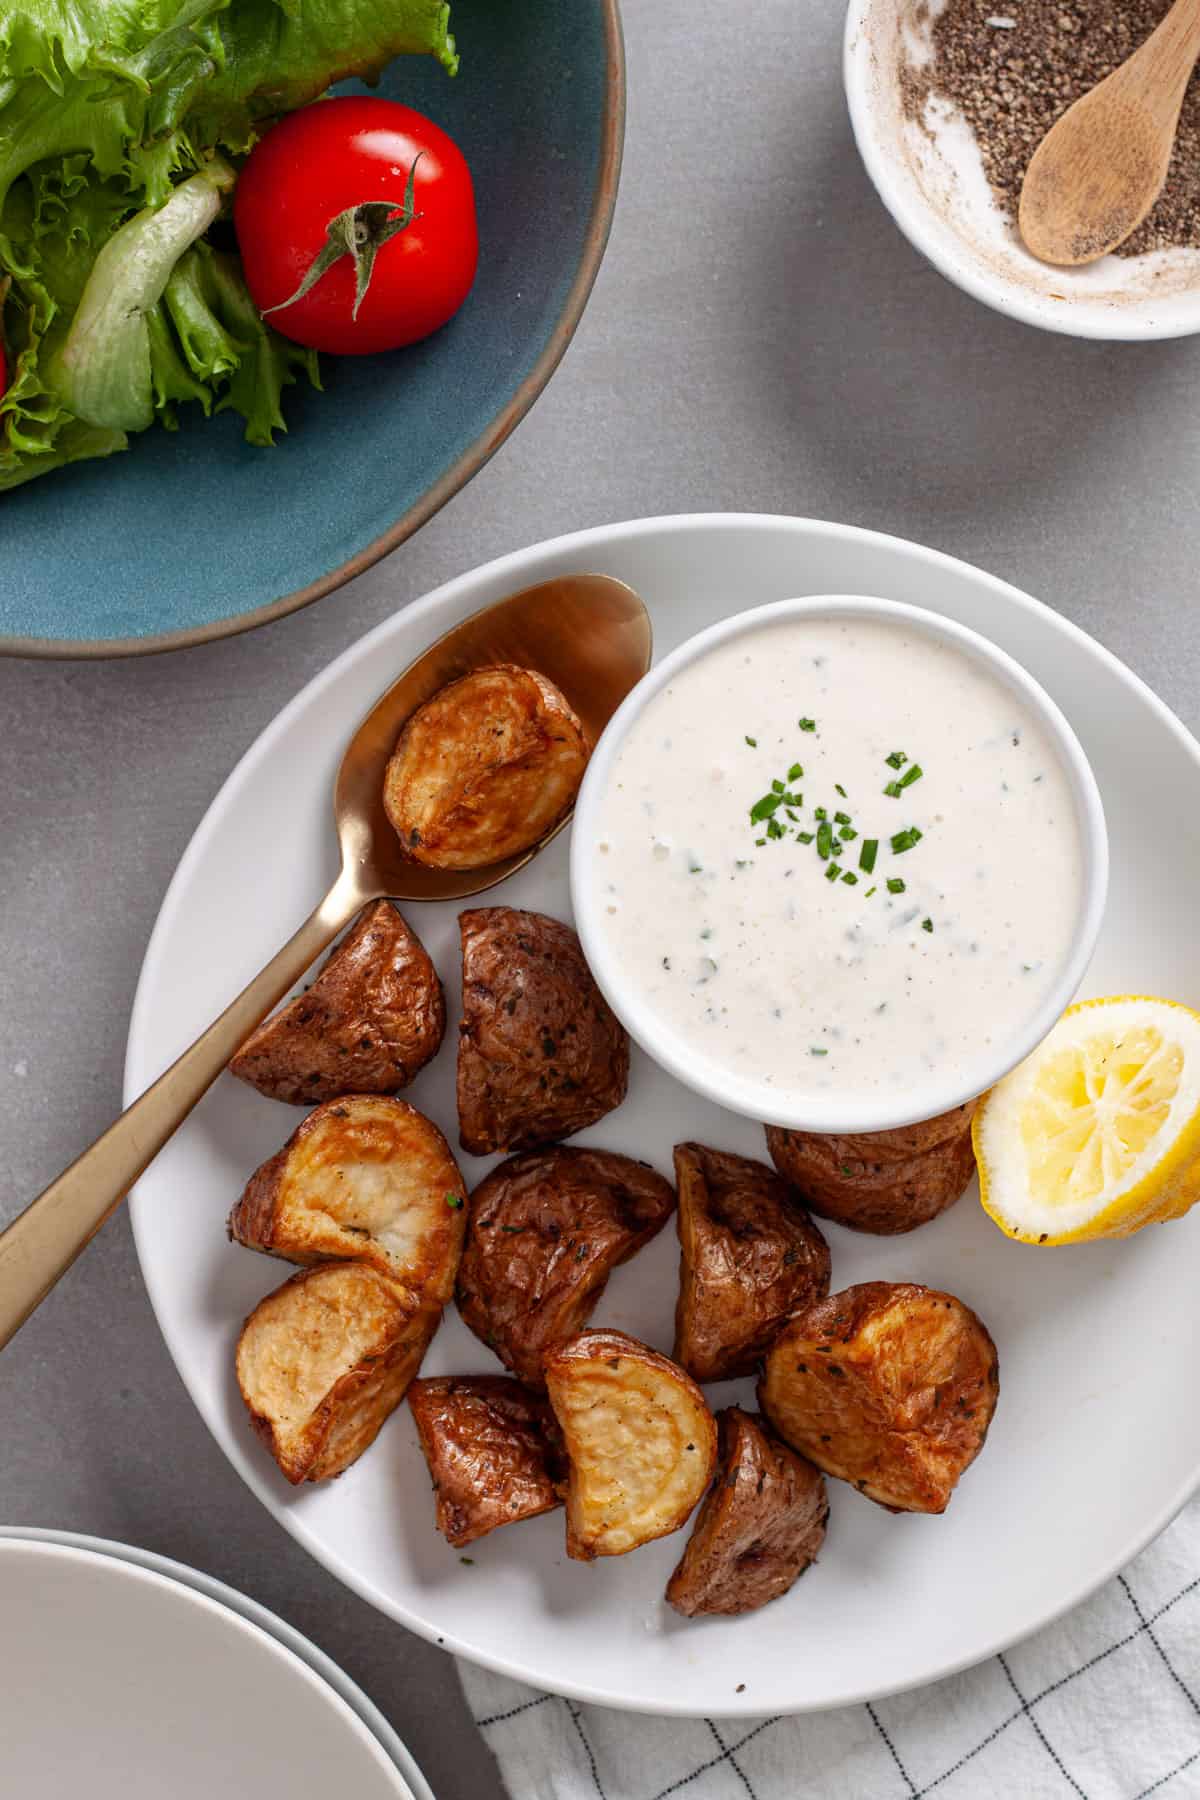 A plate of roasted potatoes with a small bowl of horseradish aioli to the side.